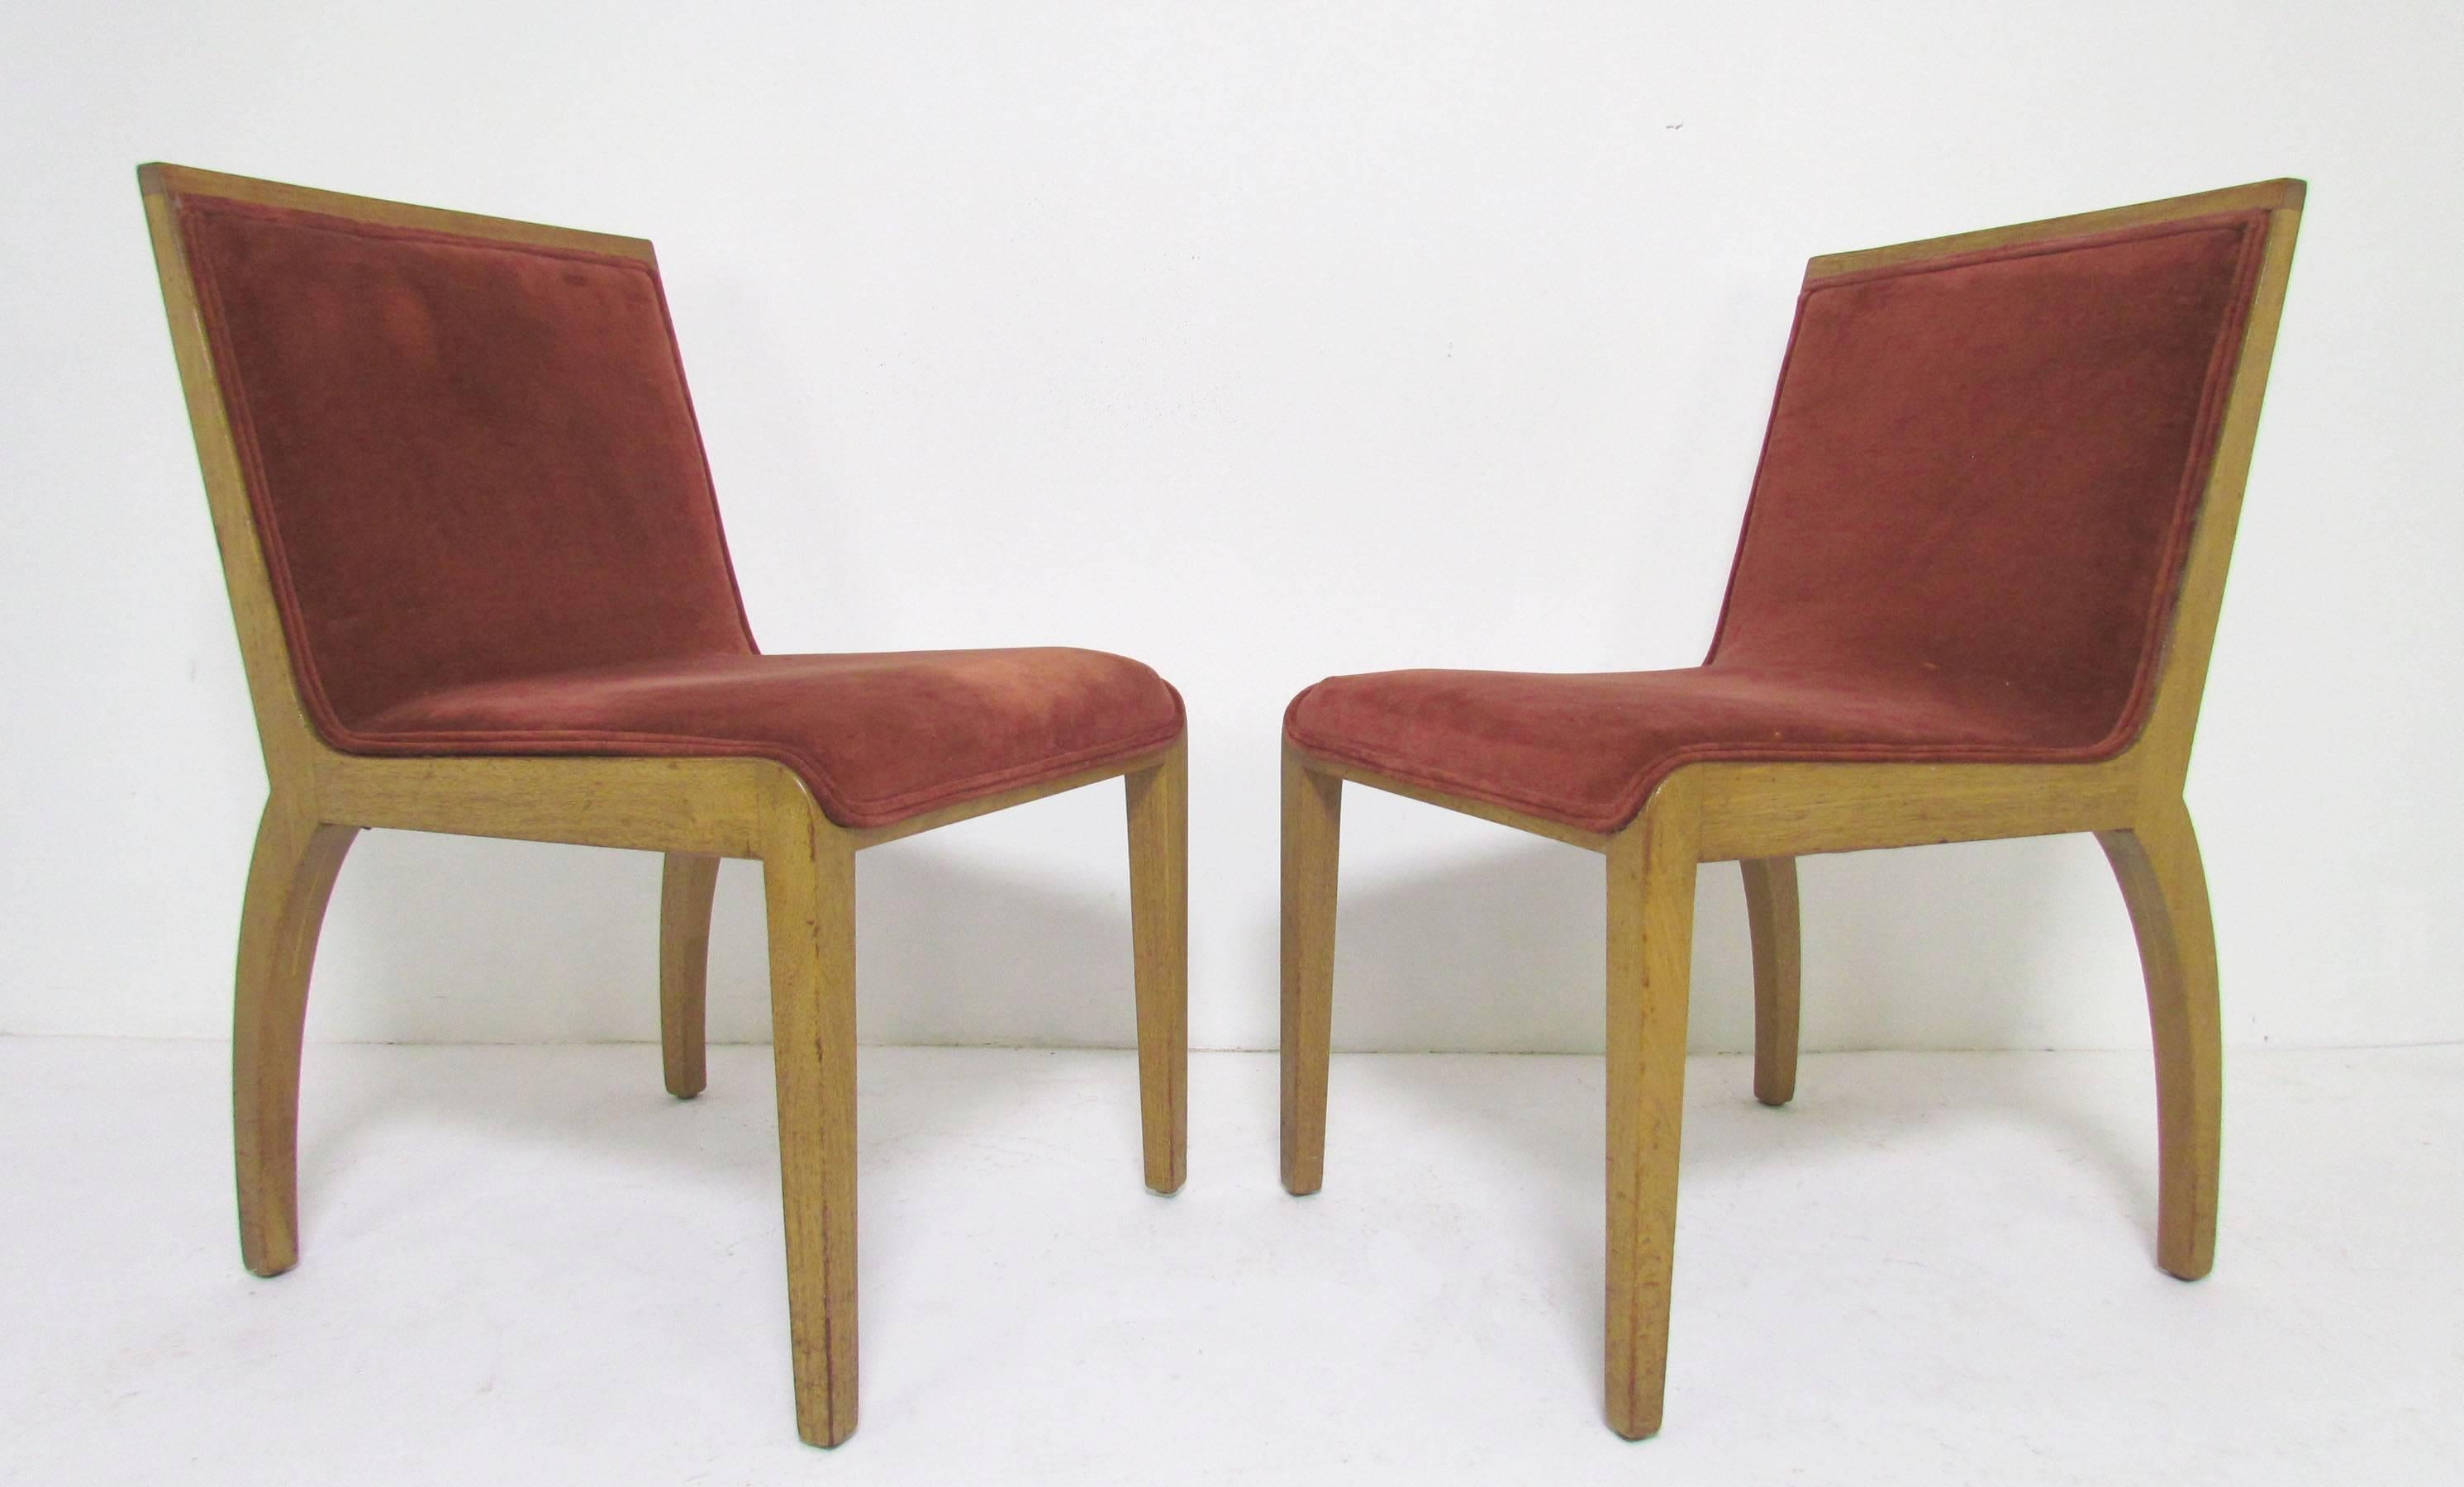 Set of four dining chairs in bleached mahogany by Edward Wormley for Dunbar, circa 1950, featuring full wooden back panels and elegantly canted legs. A quite rare model, among Wormley's earliest designs for Dunbar.